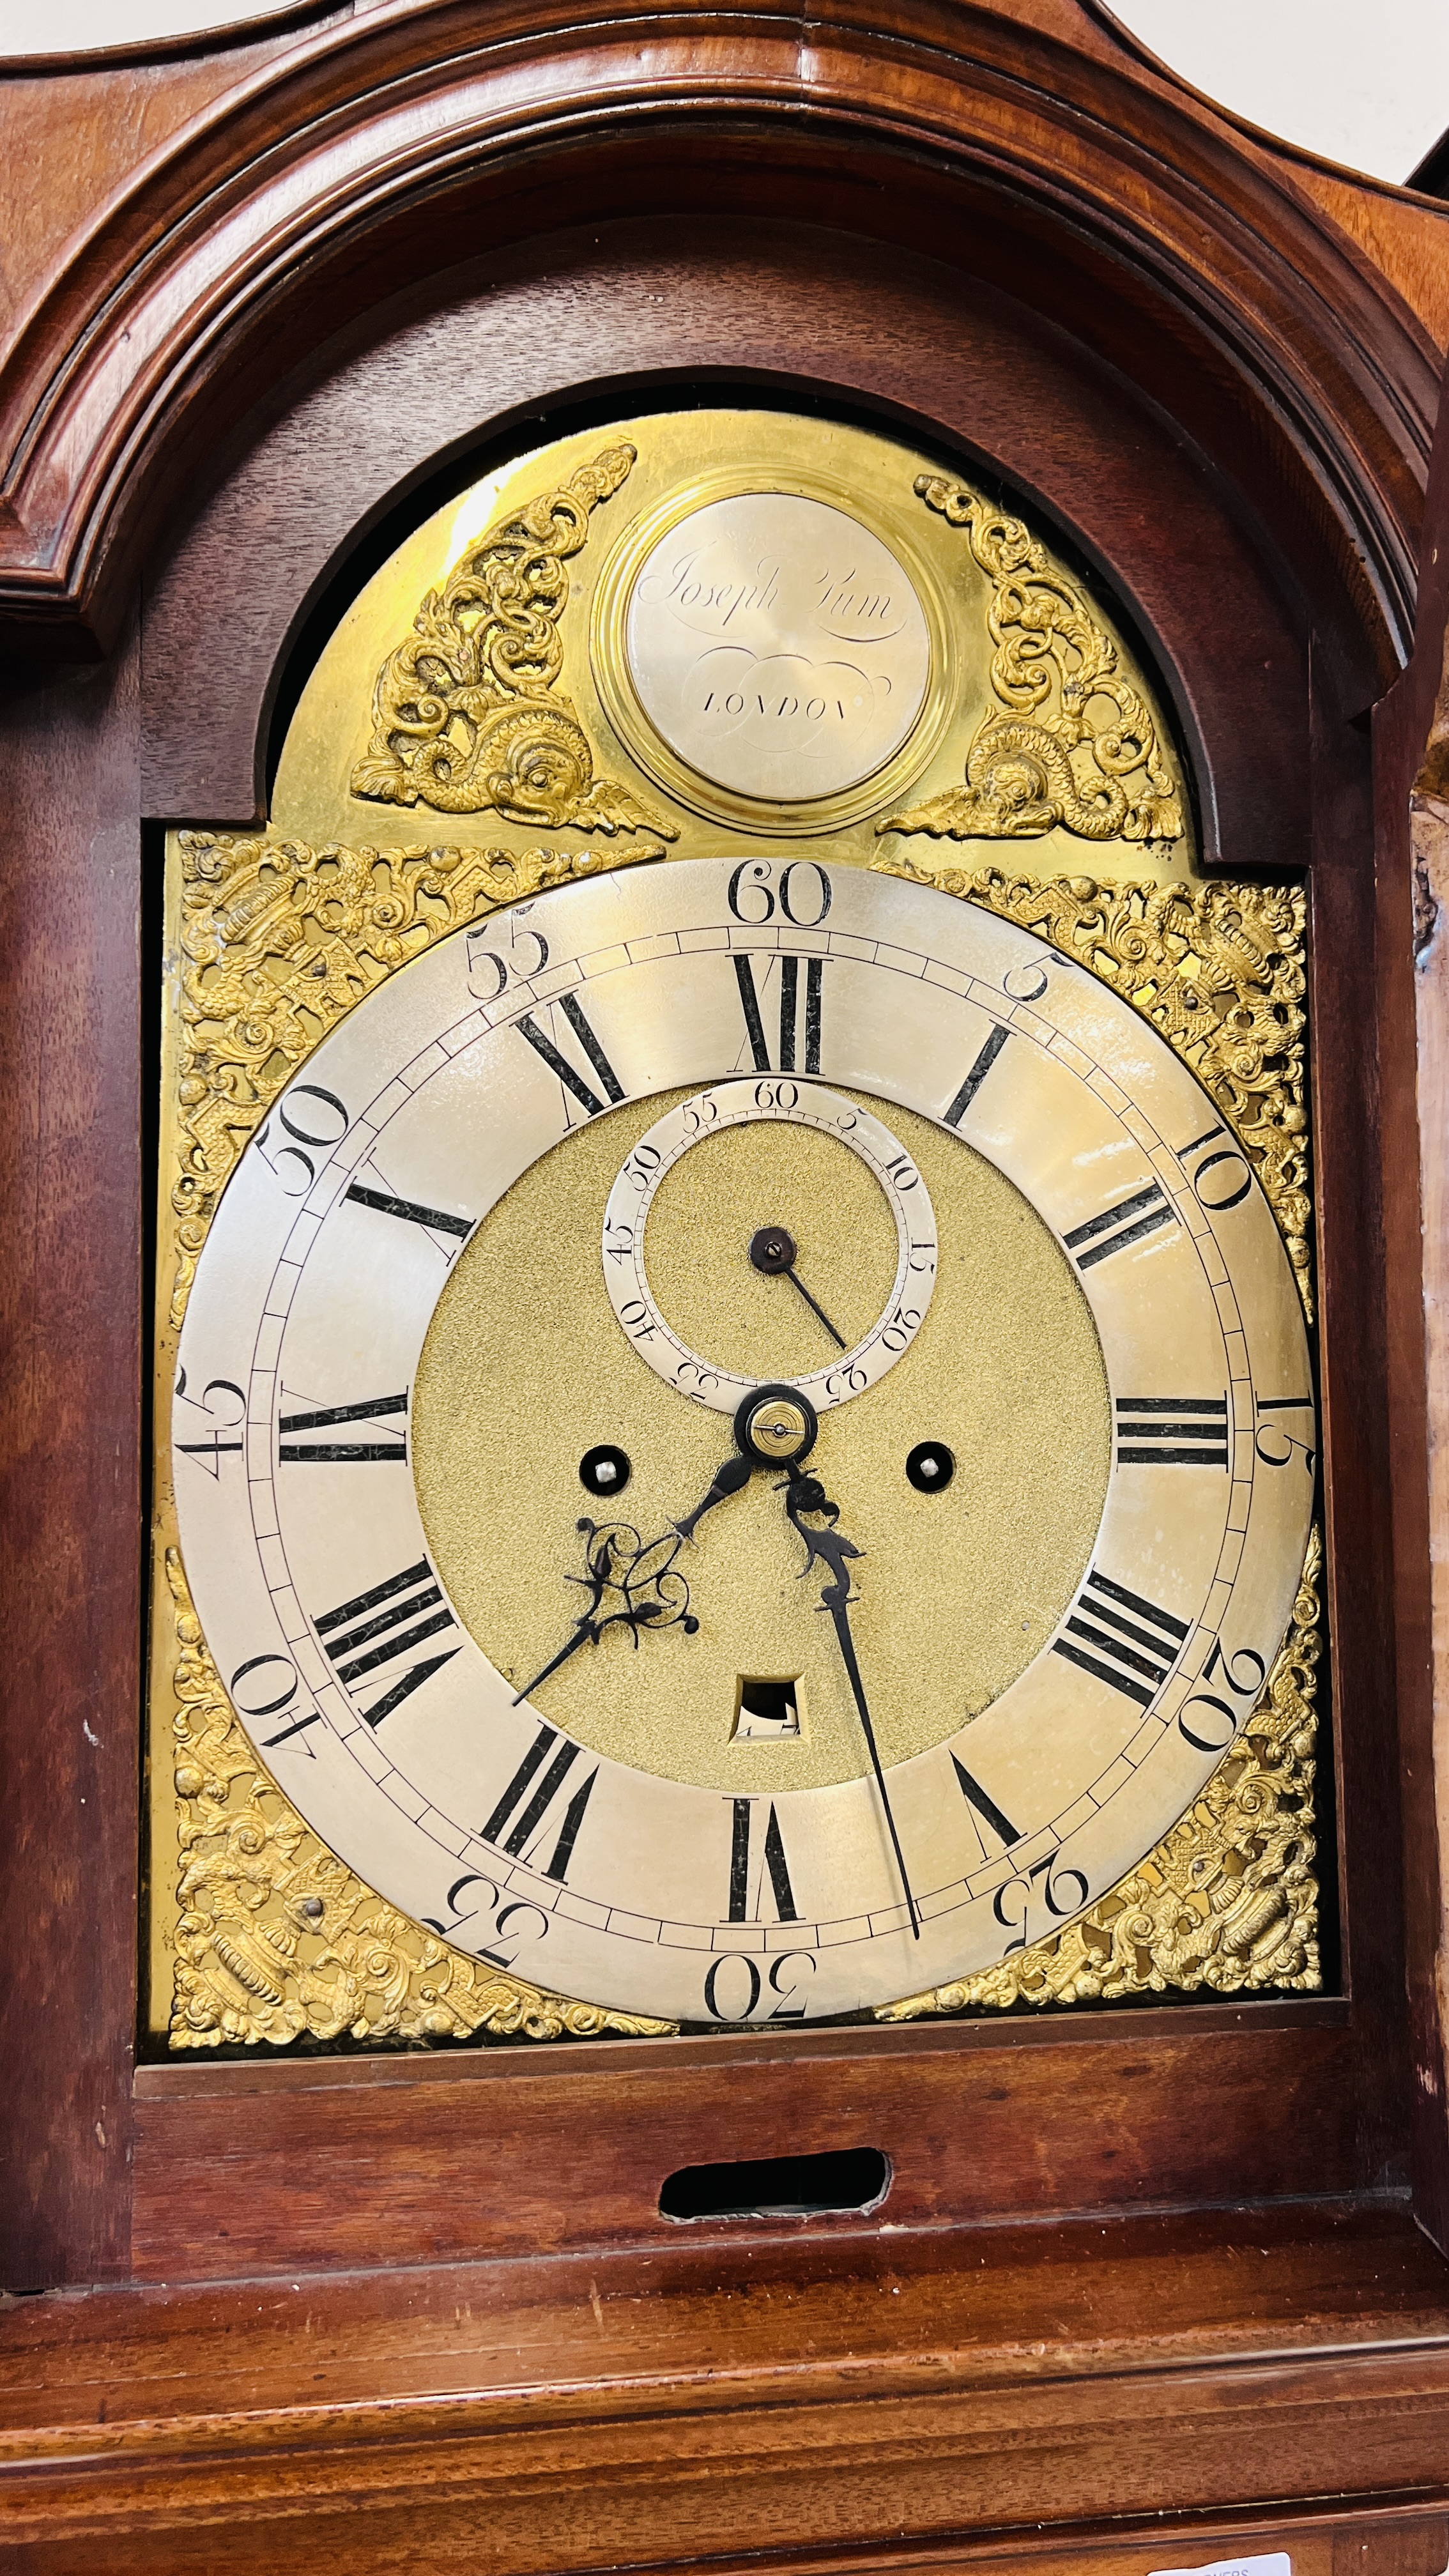 AN INLAID MAHOGANY GRANDFATHER CLOCK WITH JOSEPH LUM FACE COMPLETE WITH KEY AND PENDULUM - Image 4 of 14